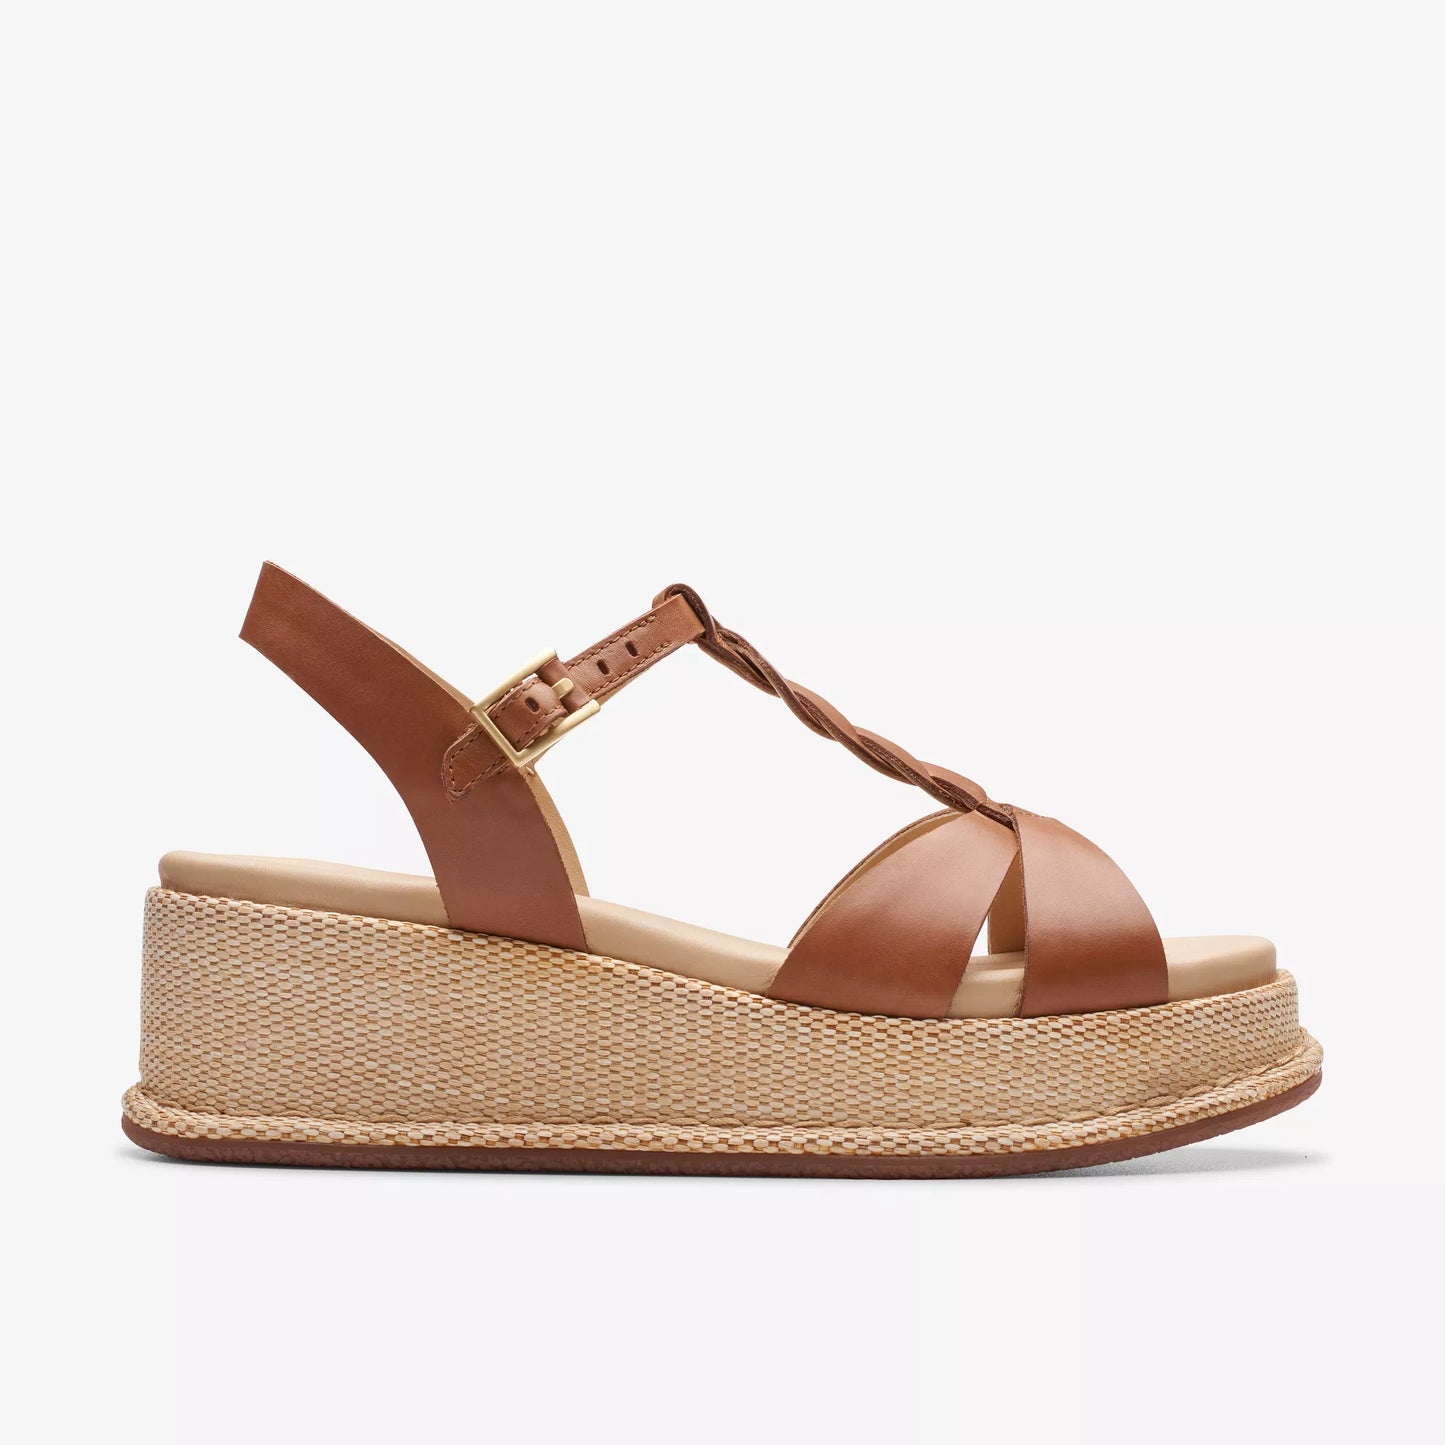 Side view of the Tan Leather Kimmei Twist Wedge by Clarks